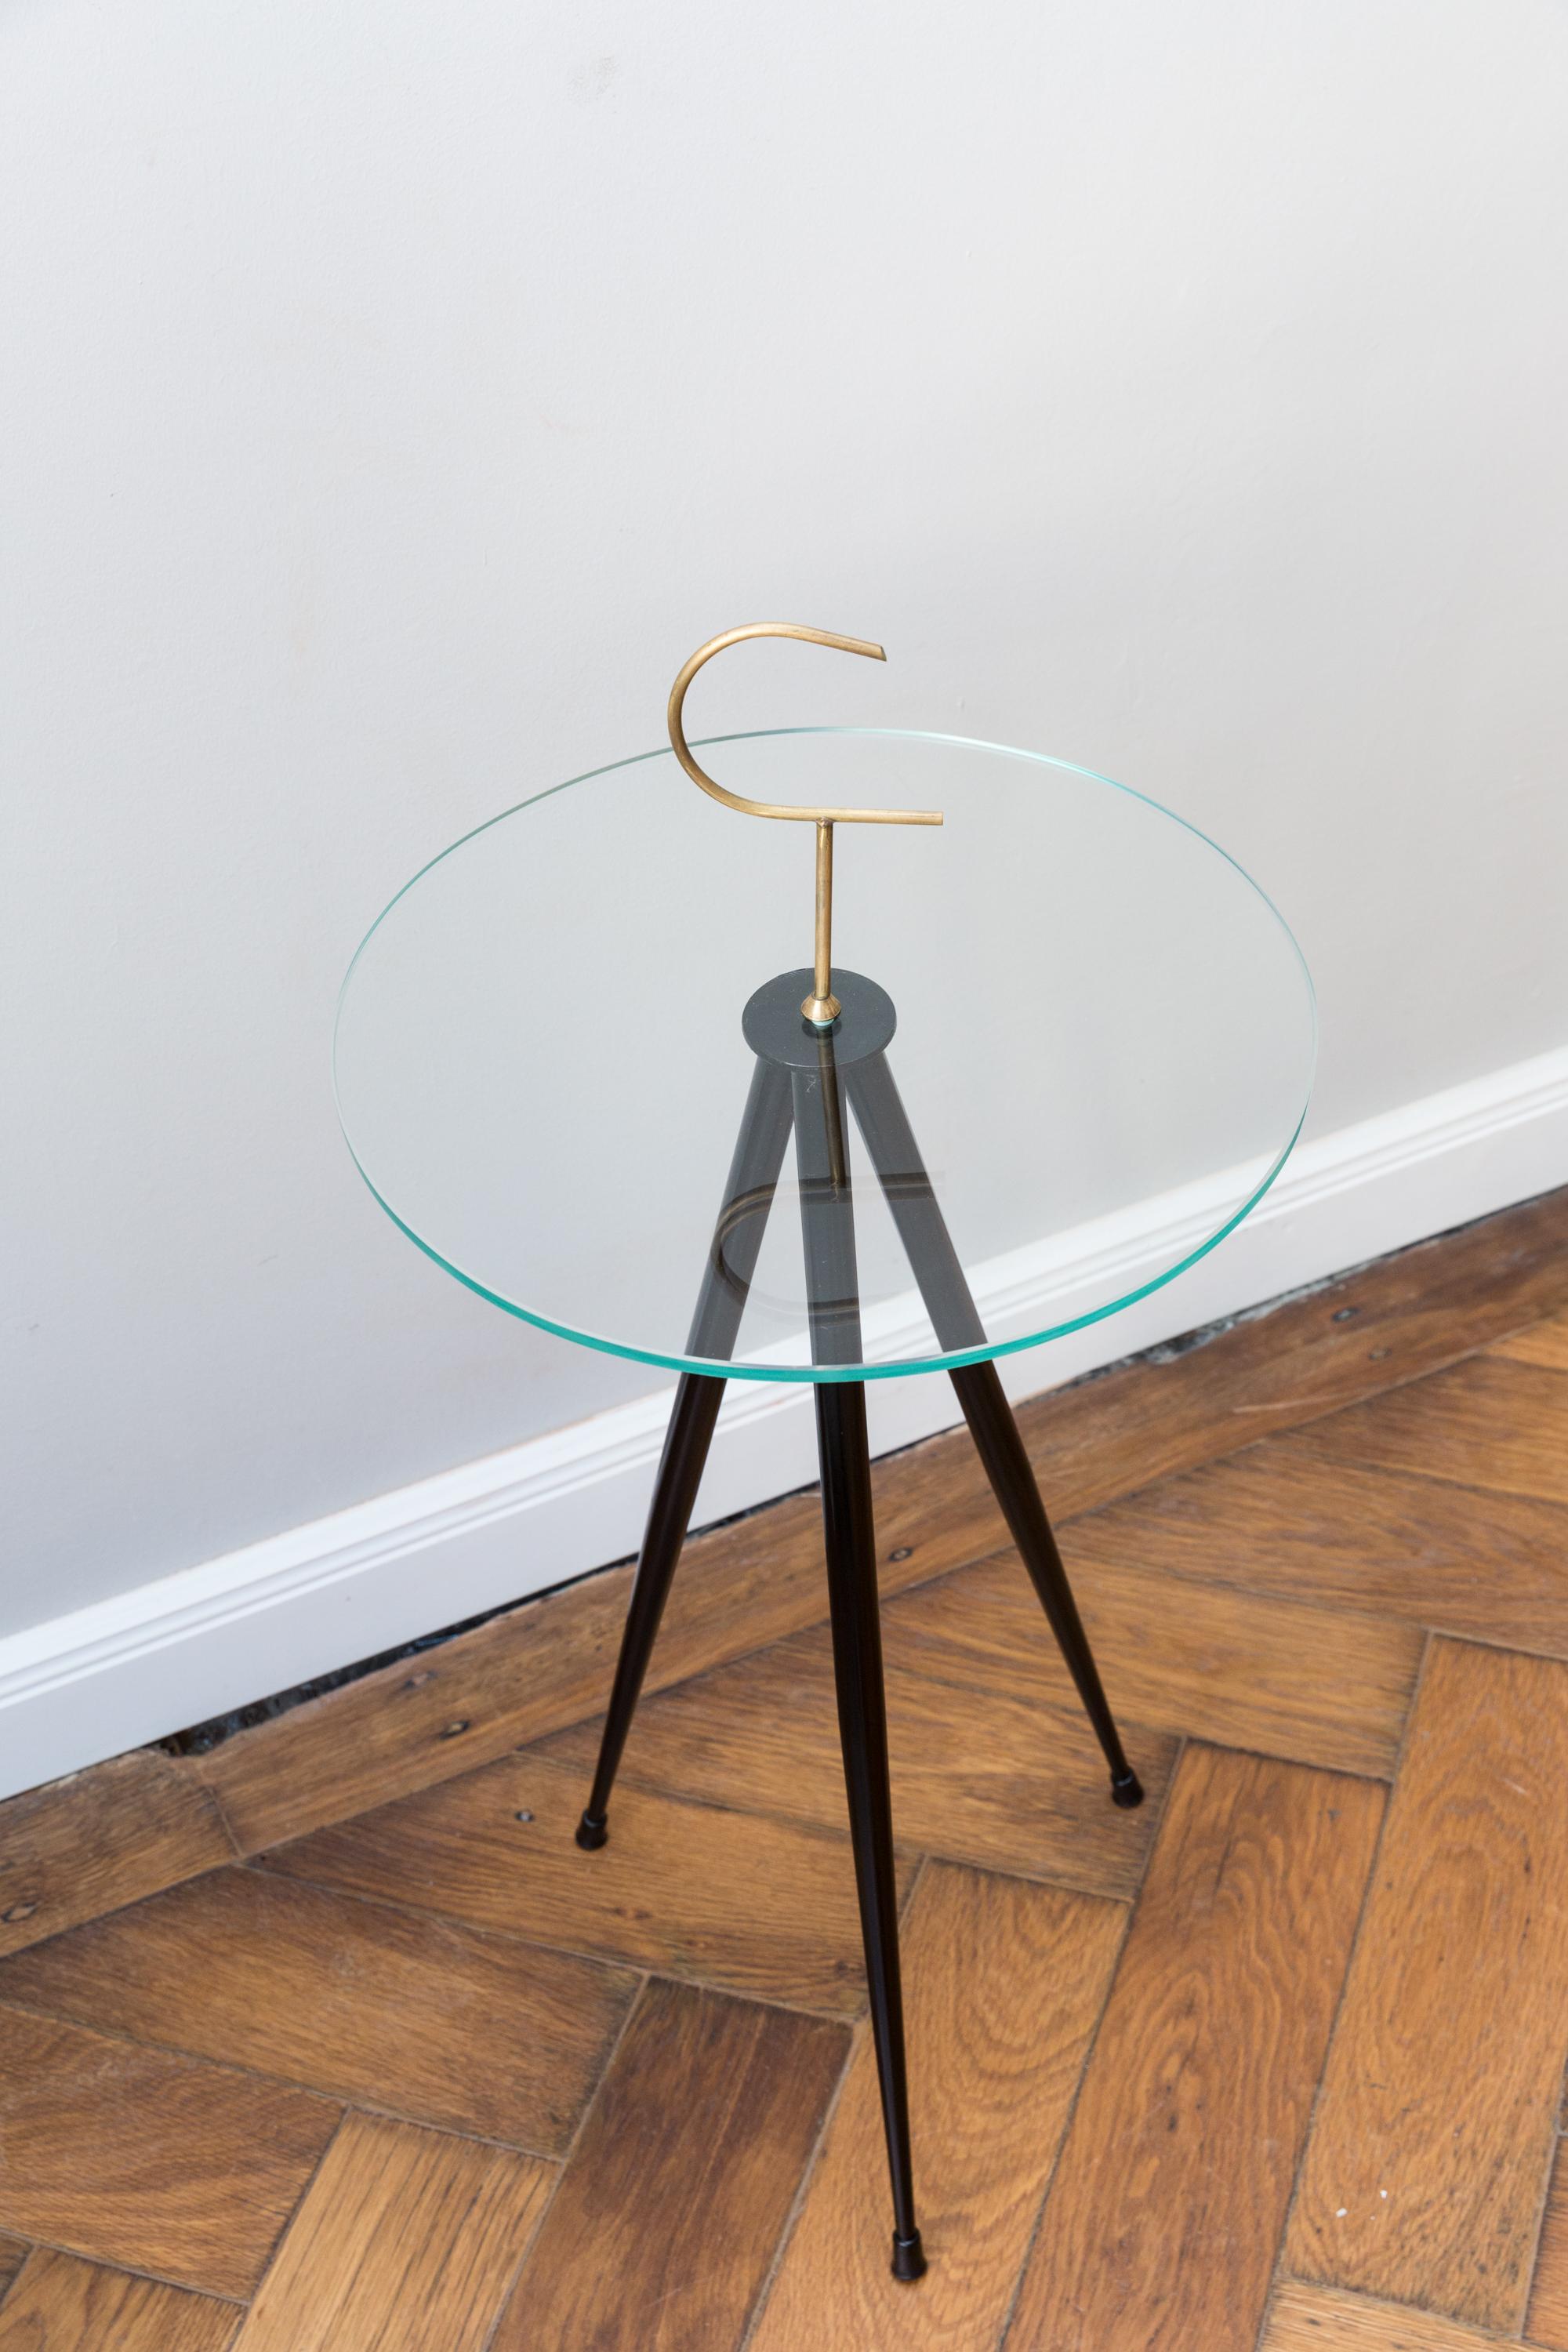 Elegant side table, Italy, circa 1950 in the style of Cesare Lacca, three black lacquered shaped metal legs, glass top, brass hook. Measures: Height 76 cm, glass plate diameter 37 cm.
Very good condition, no scratches or chips in the glass.
    